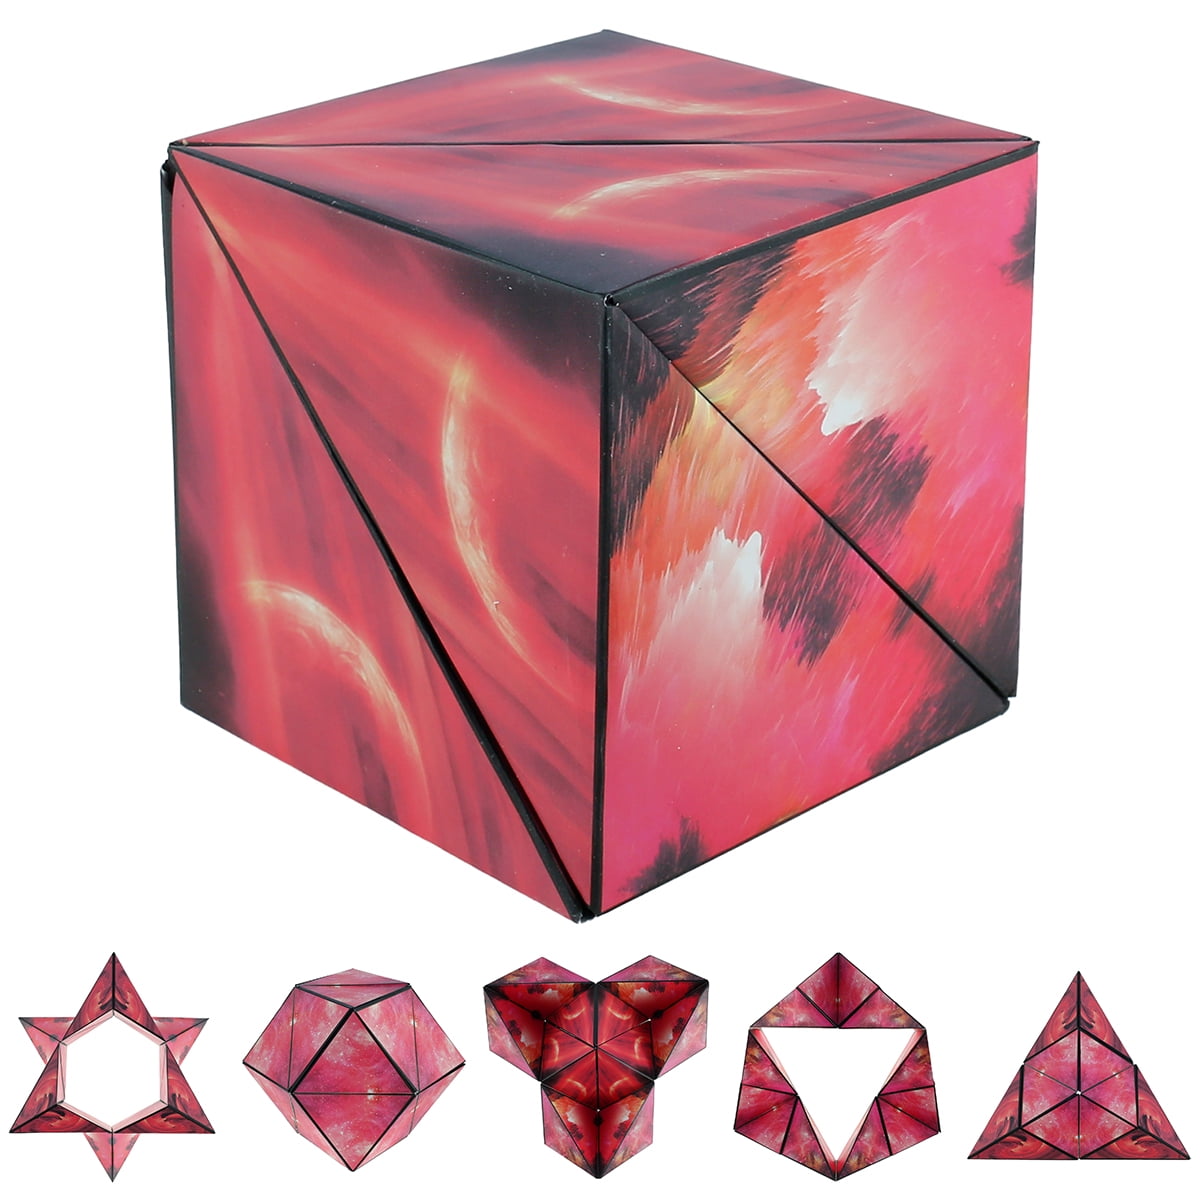 3D Changeable Fun Puzzle Magnetic Magic Cube Rubix Mind Game Adult Kids Toy Gift 